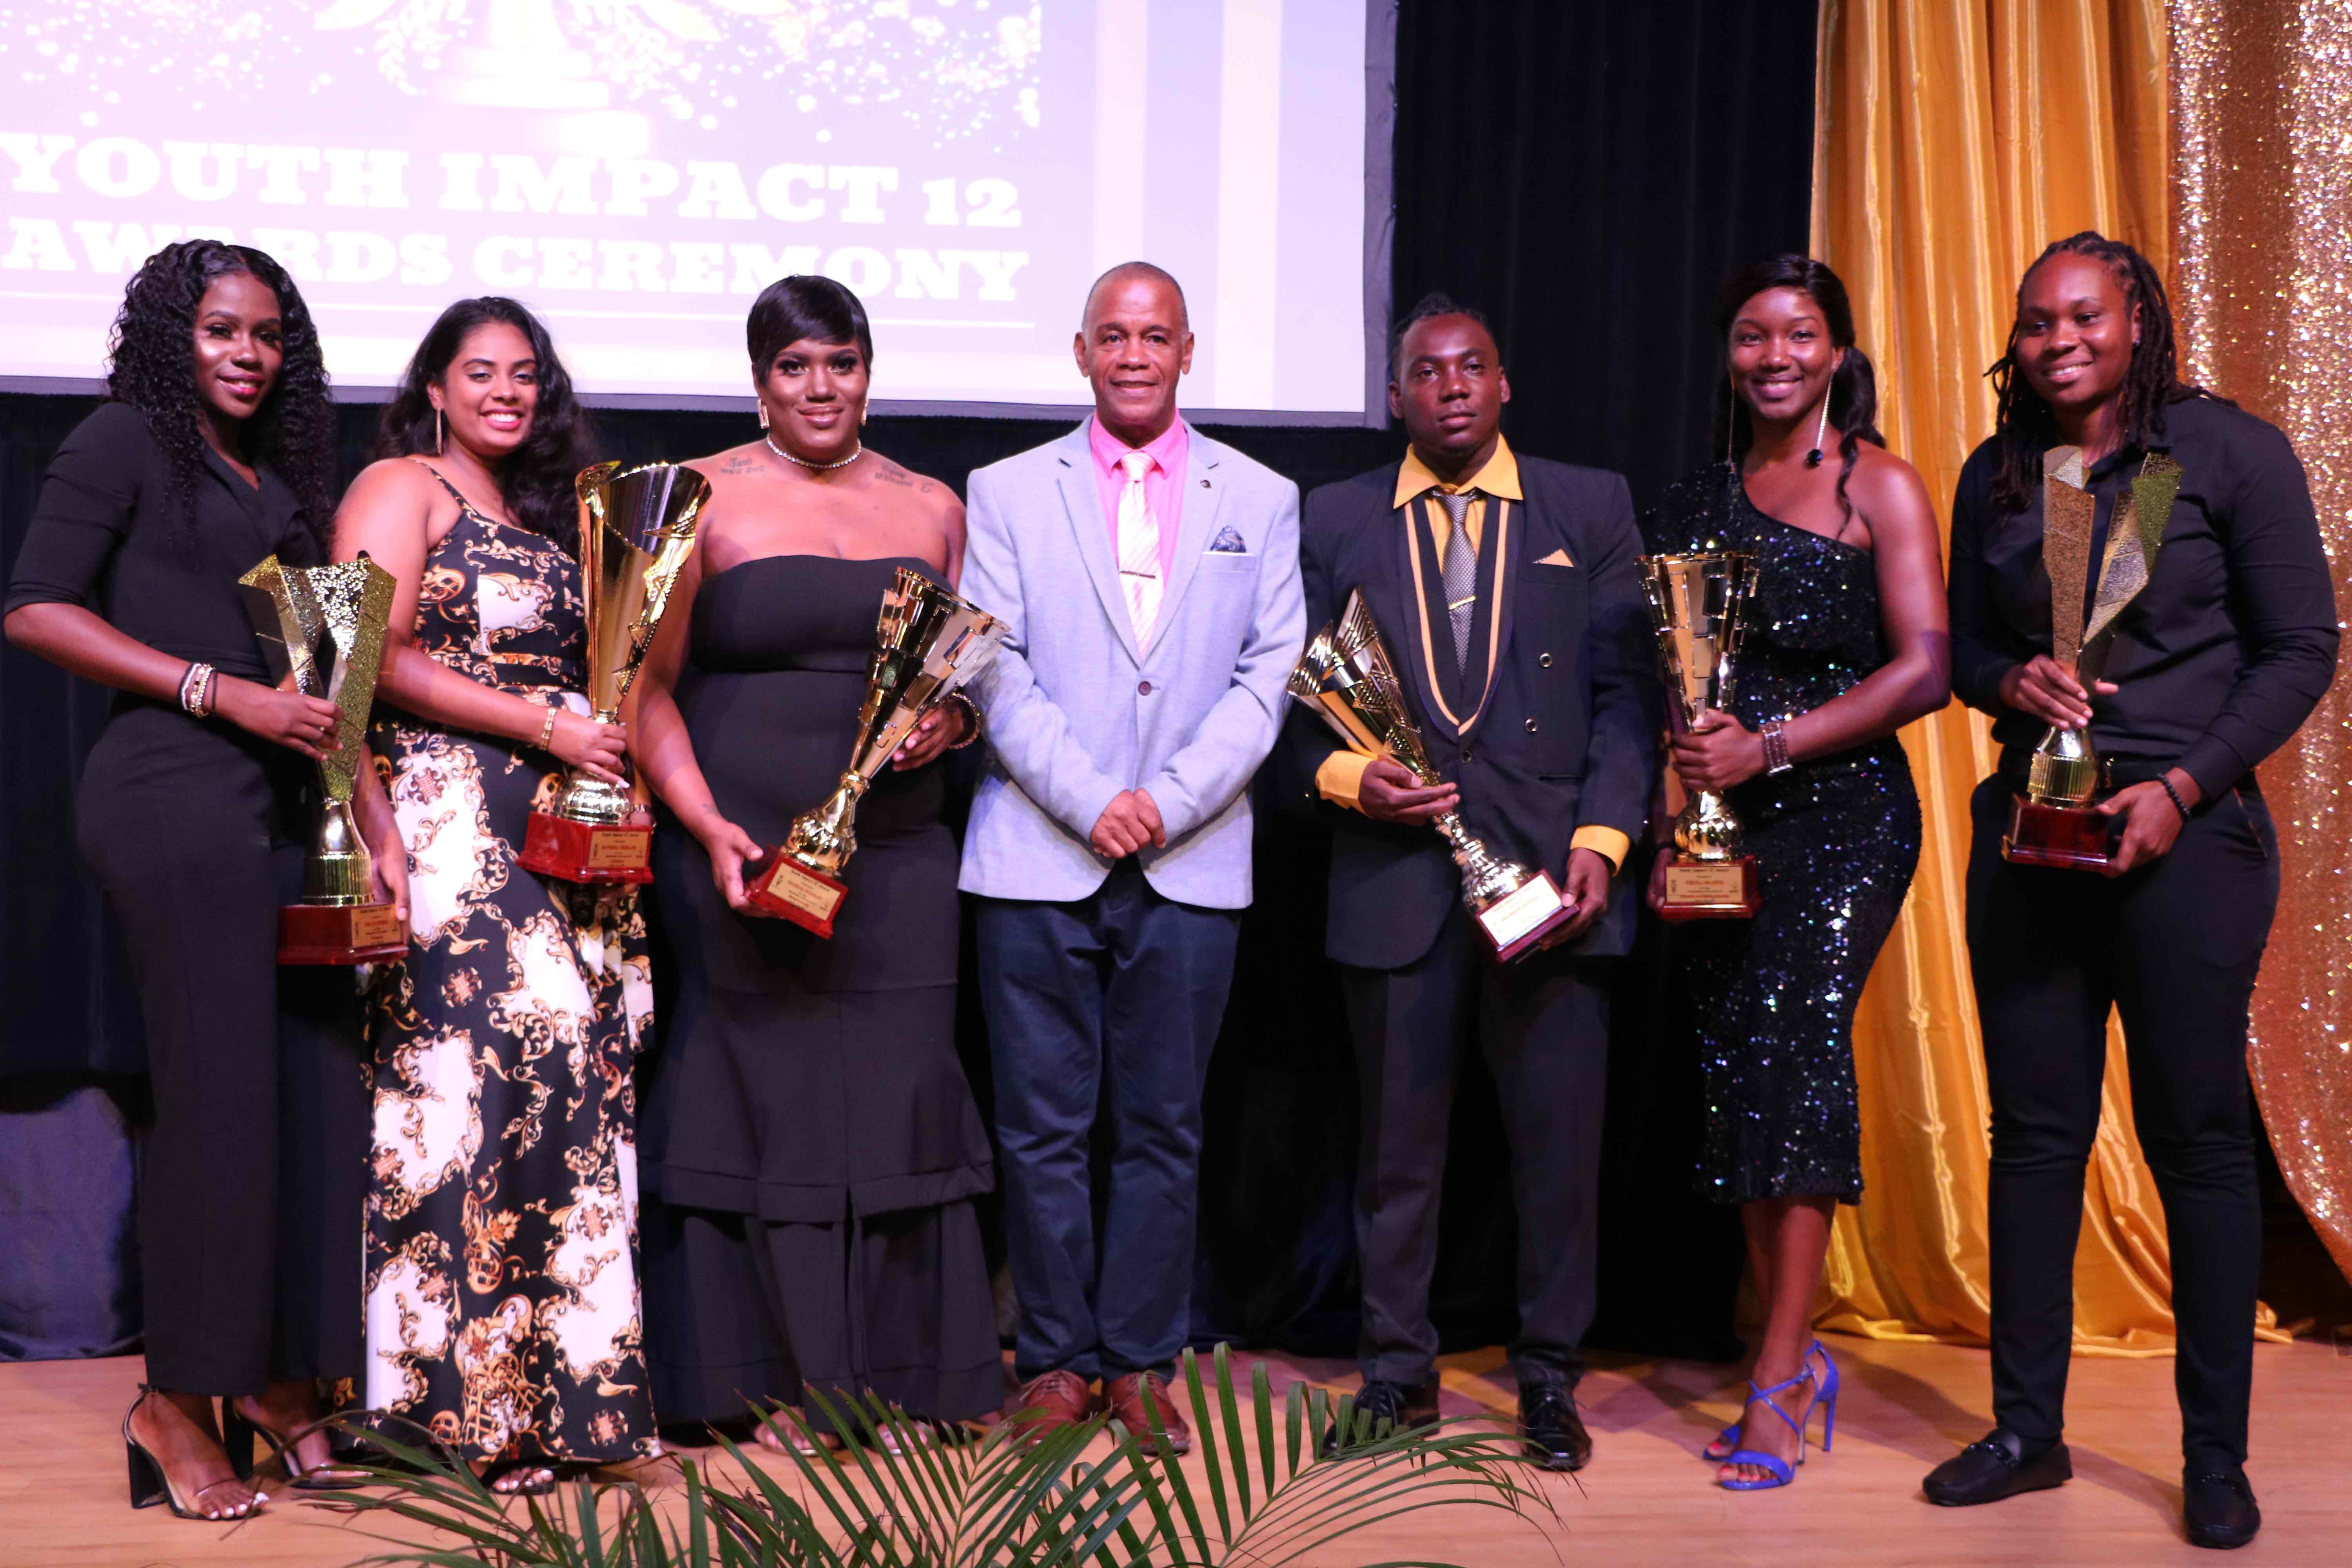 Hon. Eric Evelyn, Minister of Youth in the Nevis Island Administration (fourth from left) with the six awardees at the Youth Impact 12 Awards Ceremony hosted by the Department of Youth on August 12, 2020, at the Nevis Performing Arts Centre (l-r) Delcia Burke awarded for Volunteerism; Raveena Persaud awarded for Extraordinary Youth in Agriculture; Cecelia Stanley awarded for Youth in Entrepreneurship; Brandon Powell awarded for Youth in Technology; Verna Grant awarded for Education and Life-long Learning; and Melicia Clarke awarded for Sports Excellence